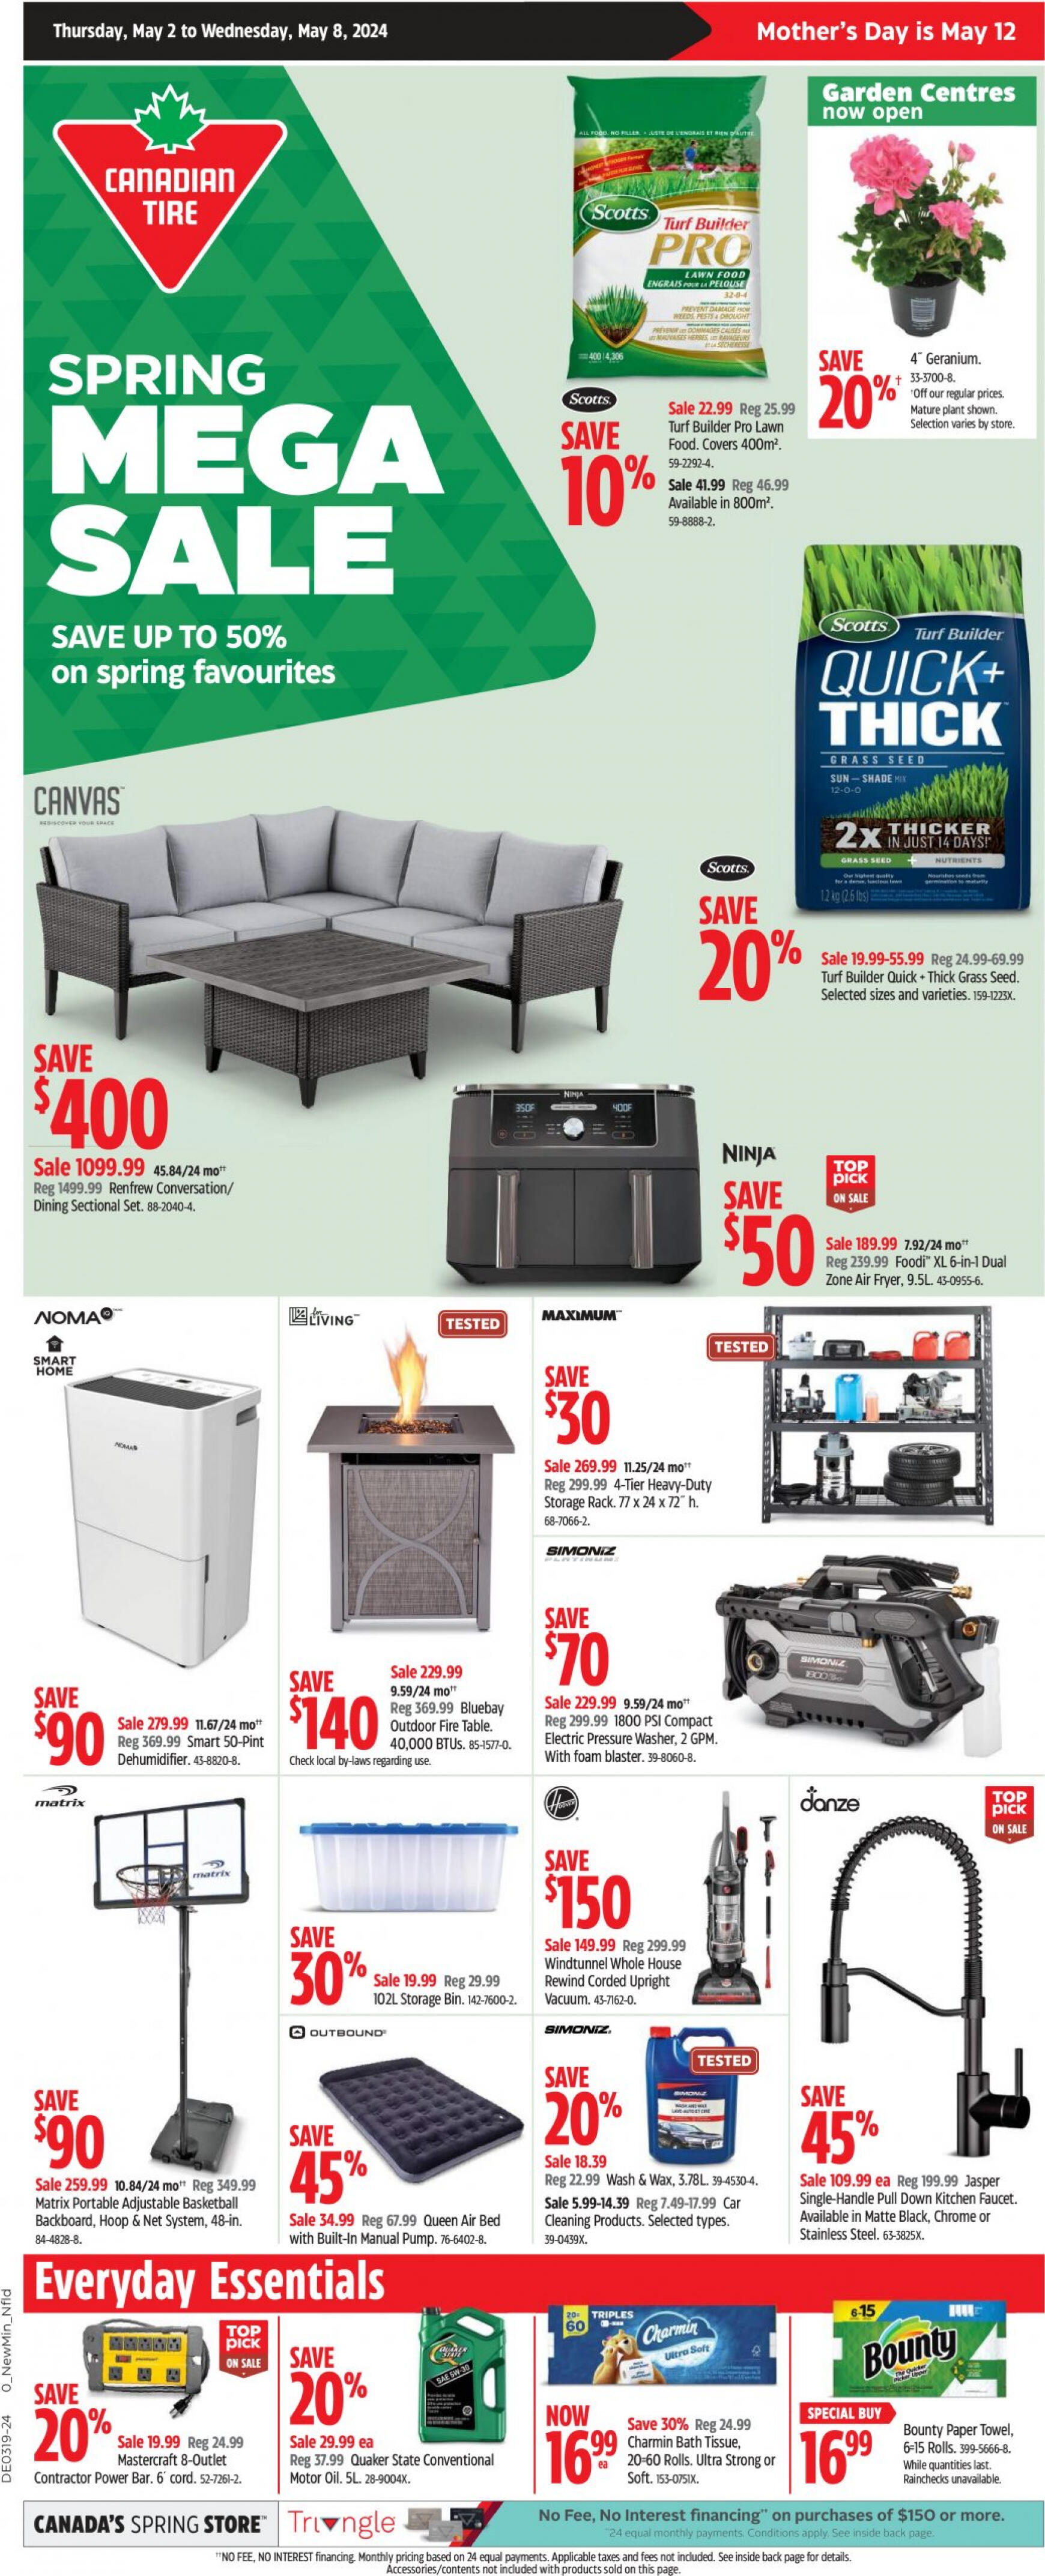 canadian-tire - Canadian Tire flyer current 02.05. - 08.05.